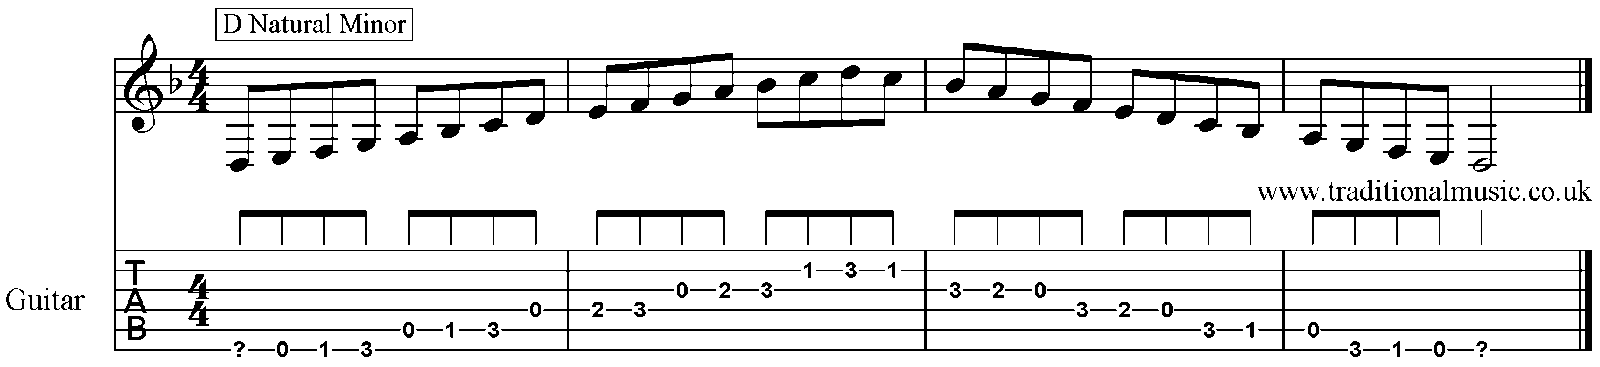 Minor Scales for Guitar A